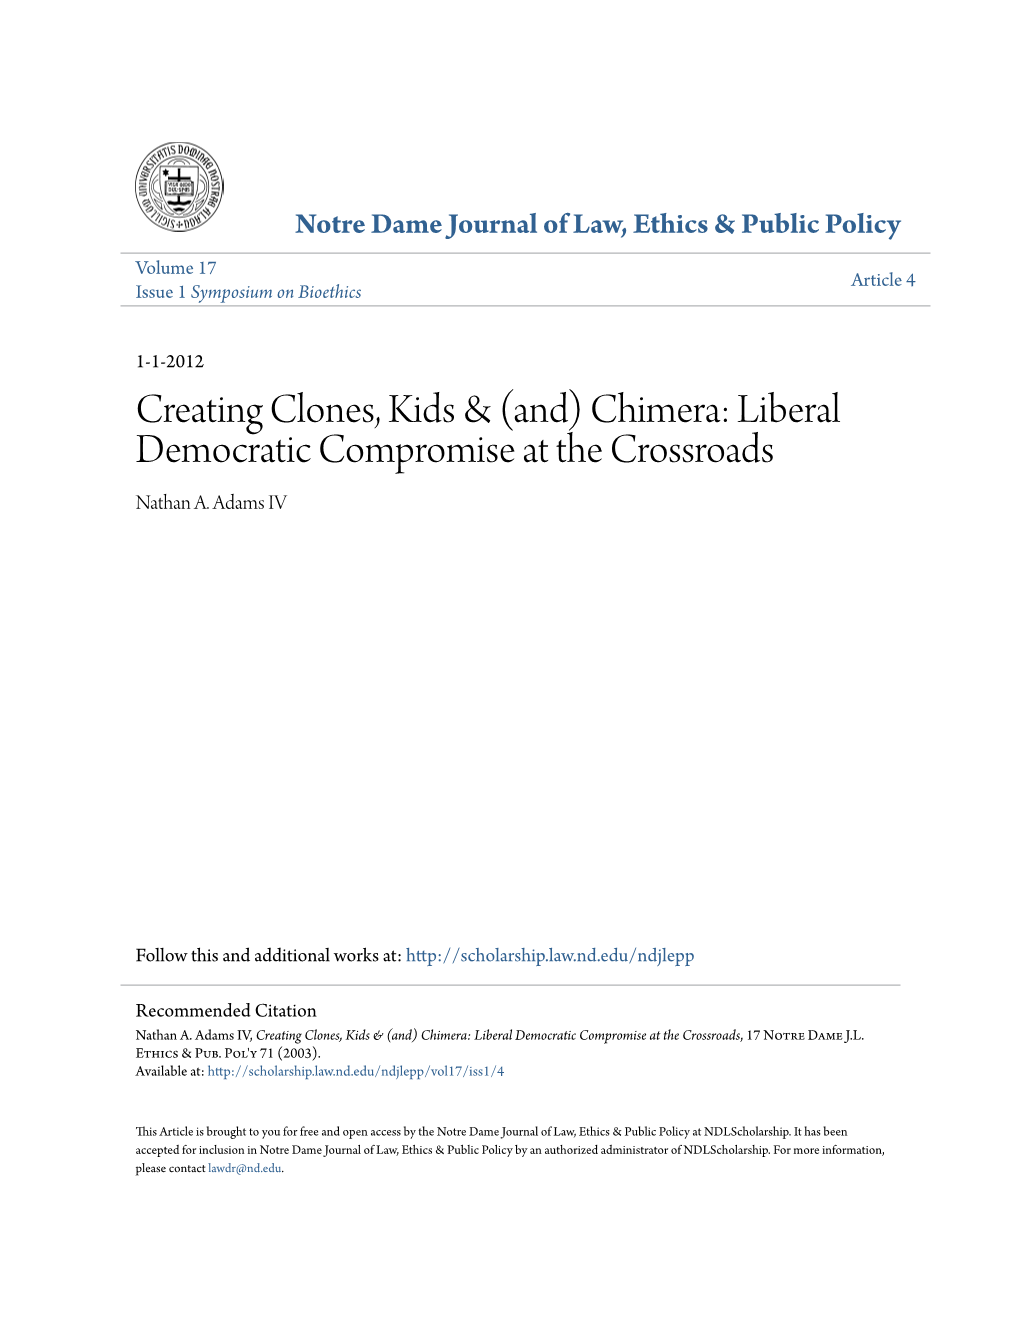 Creating Clones, Kids & (And) Chimera: Liberal Democratic Compromise at the Crossroads Nathan A